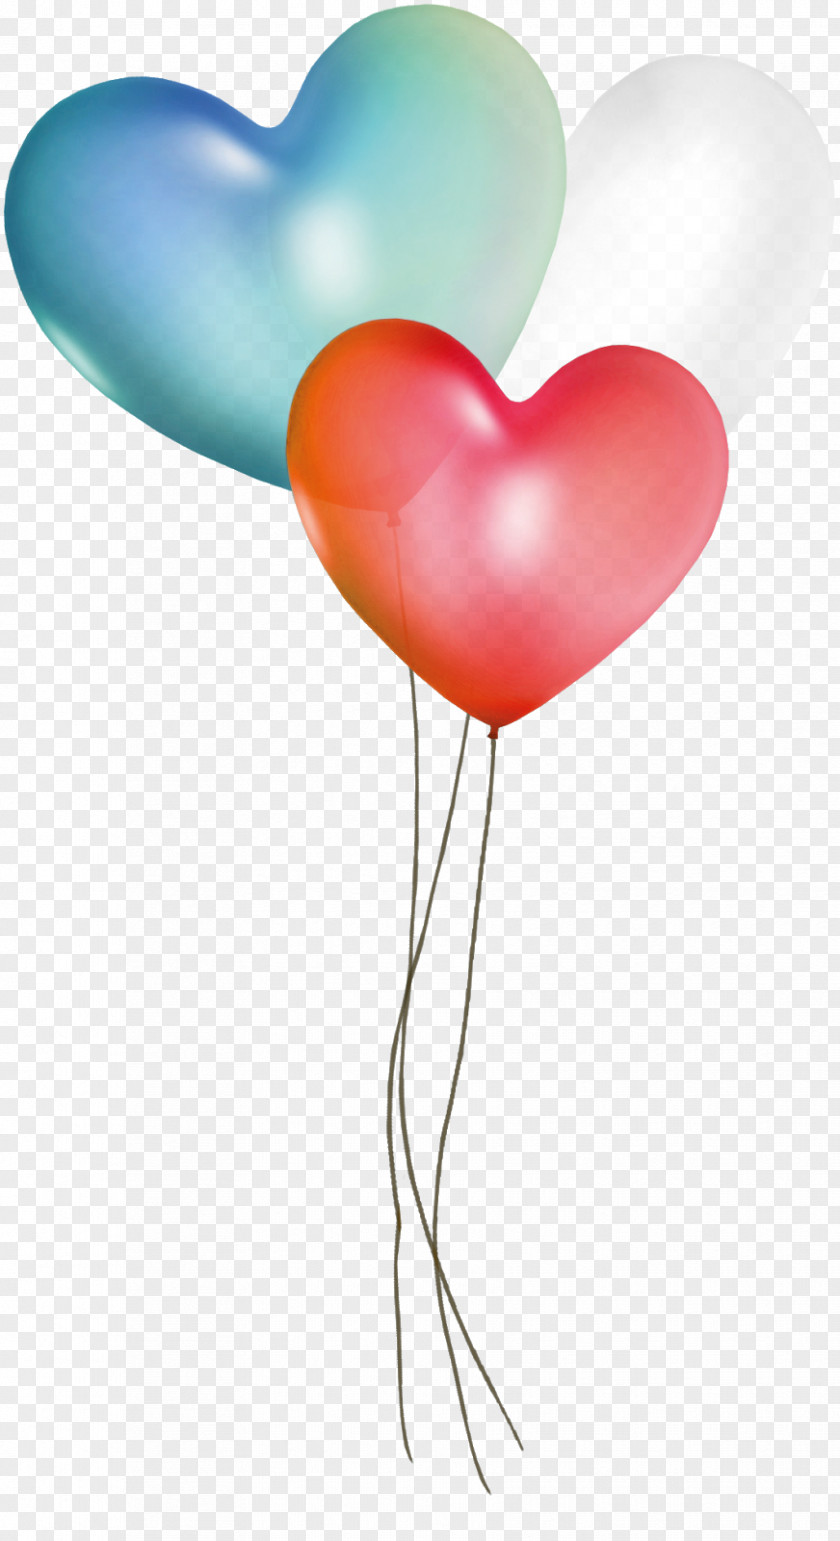 Balloon Download PNG